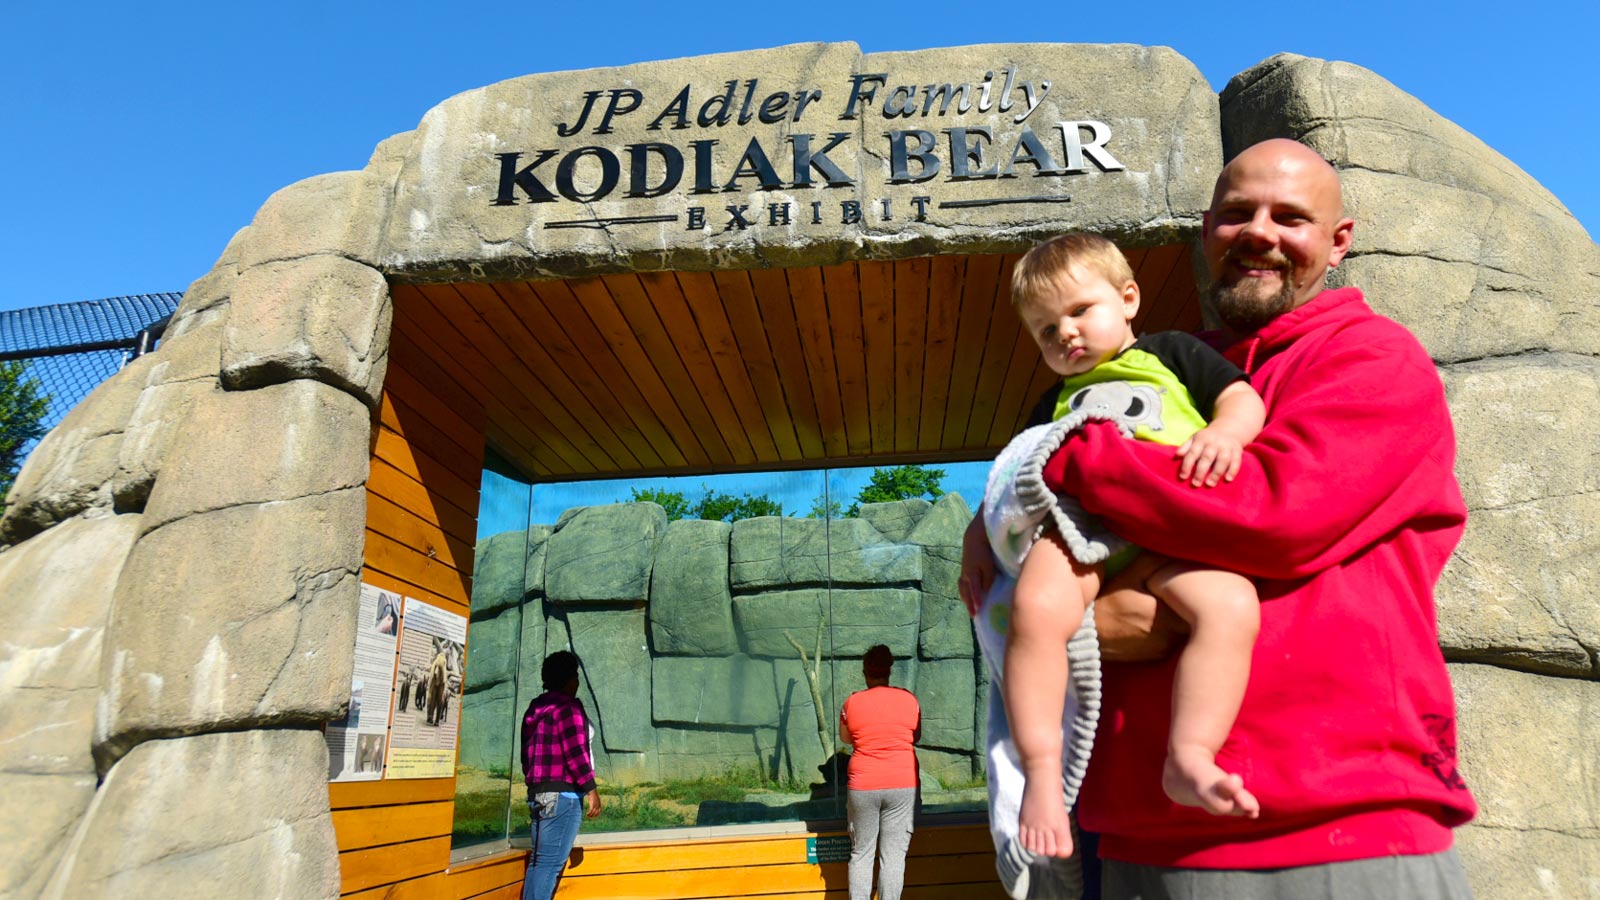 Summer attractions you shouldn’t miss: Family at Kodiak bear exhibit at Wildwood Park & Zoo Marshfield WI